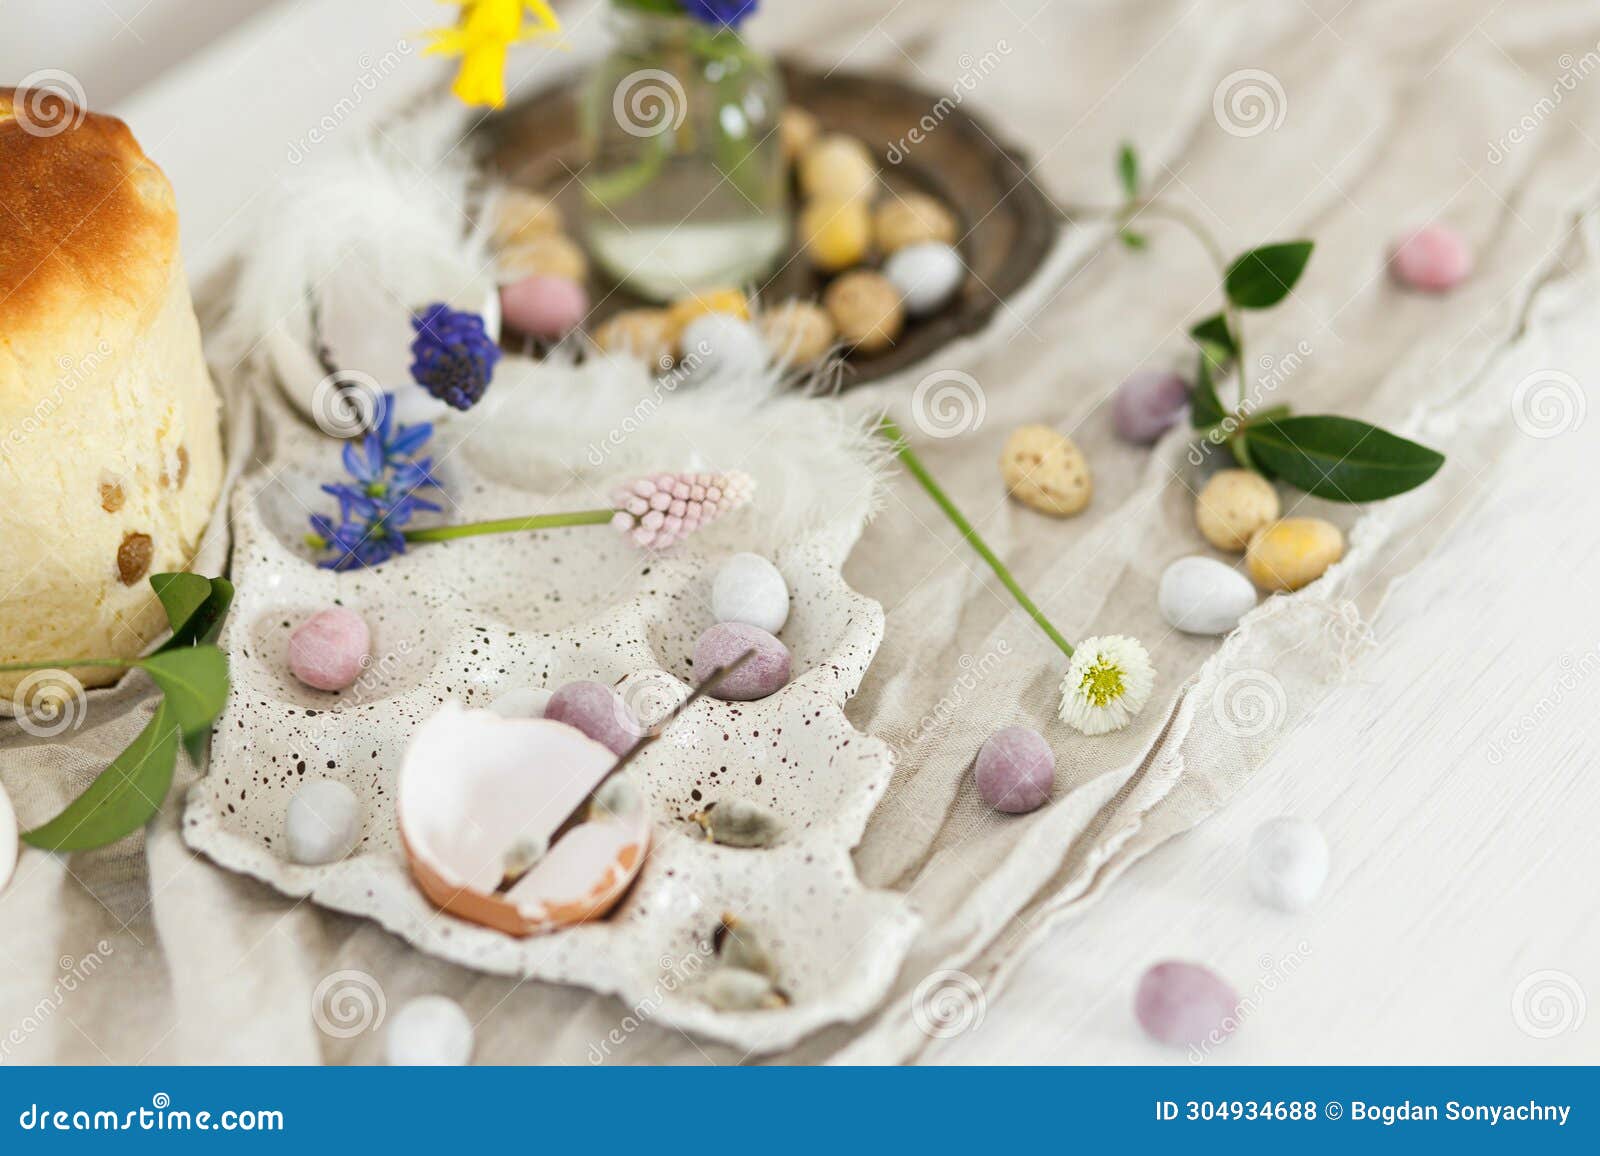 Colorful Easter Chocolate Eggs, Easter Bread, Spring Flowers and Linen ...